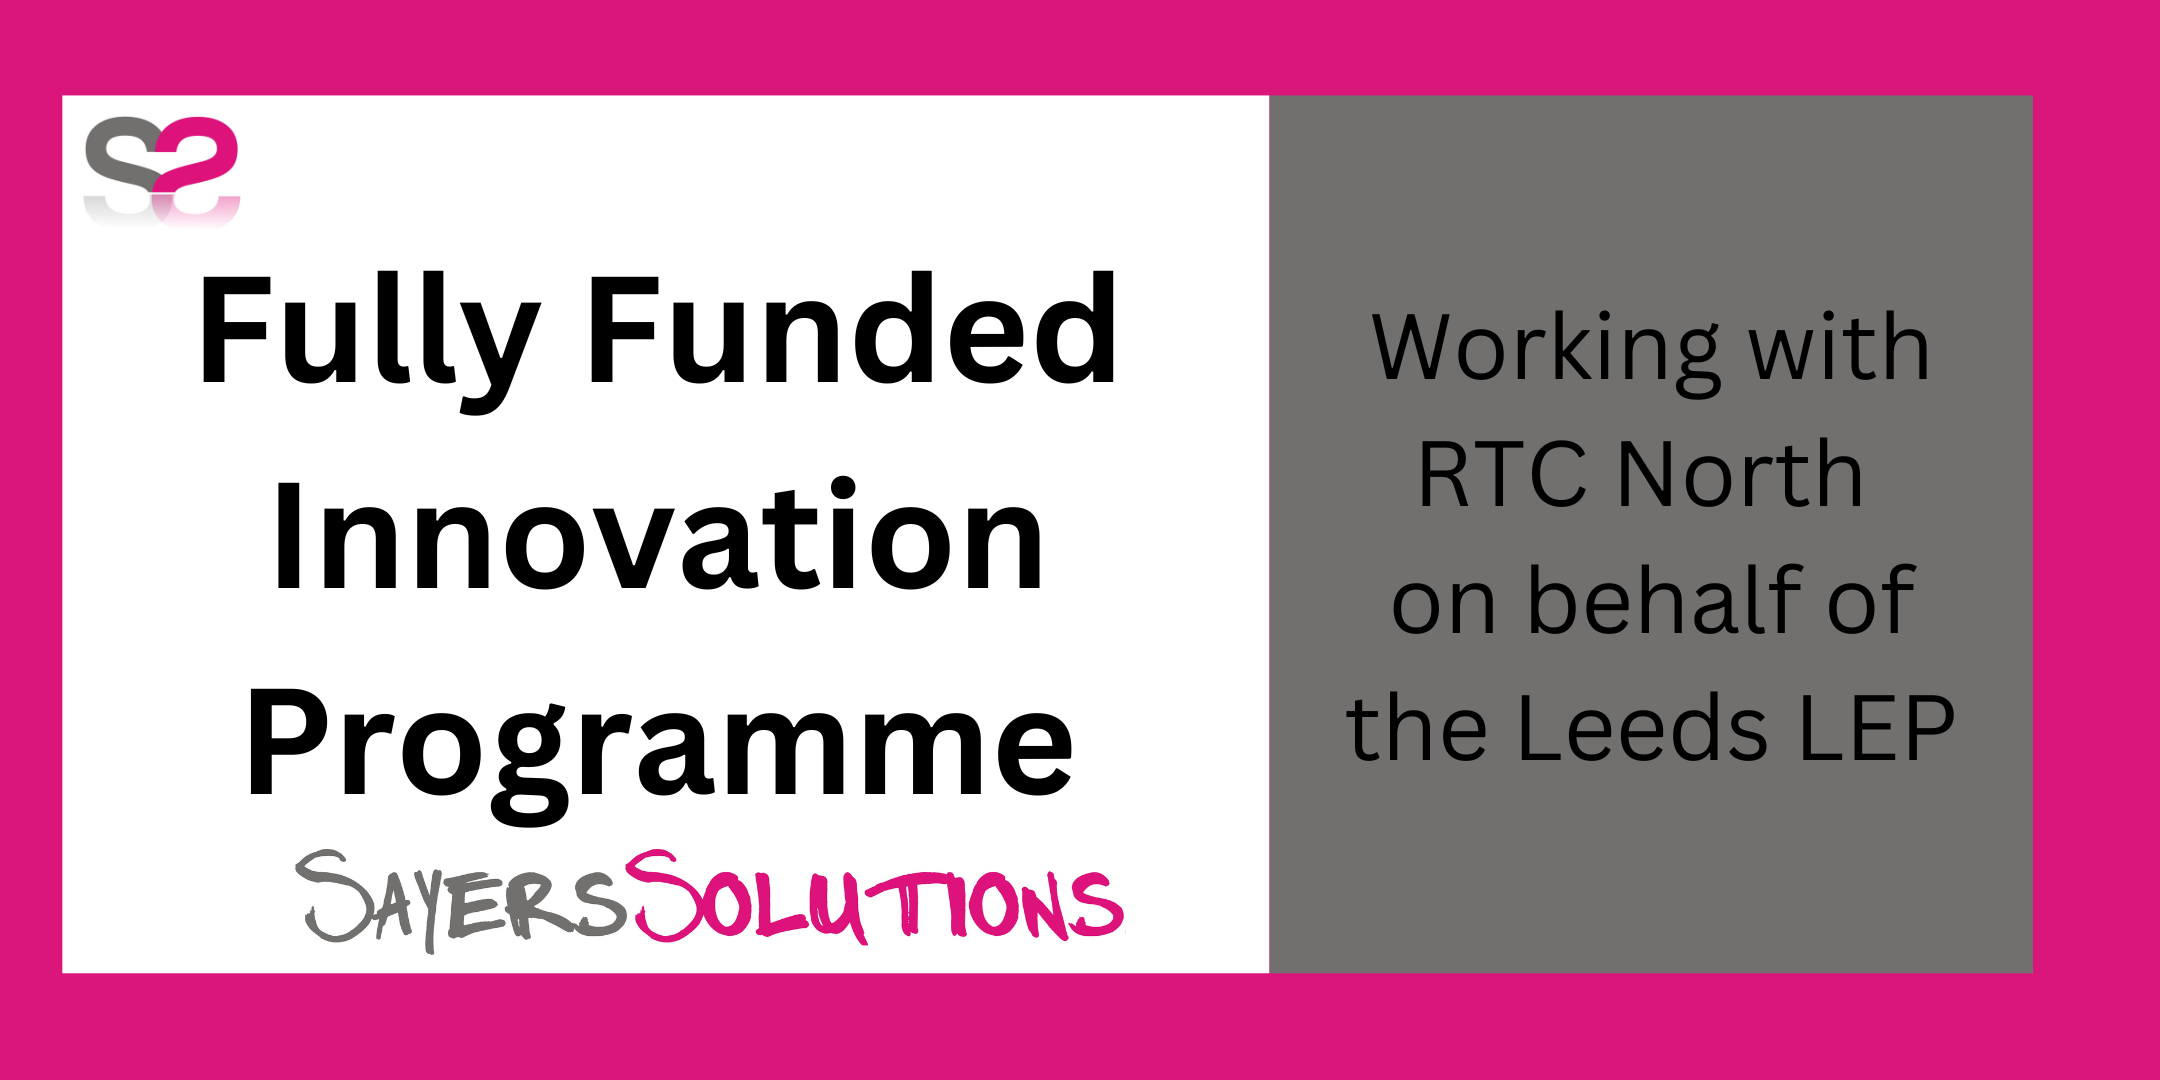 Fully Funded Innovation Programme